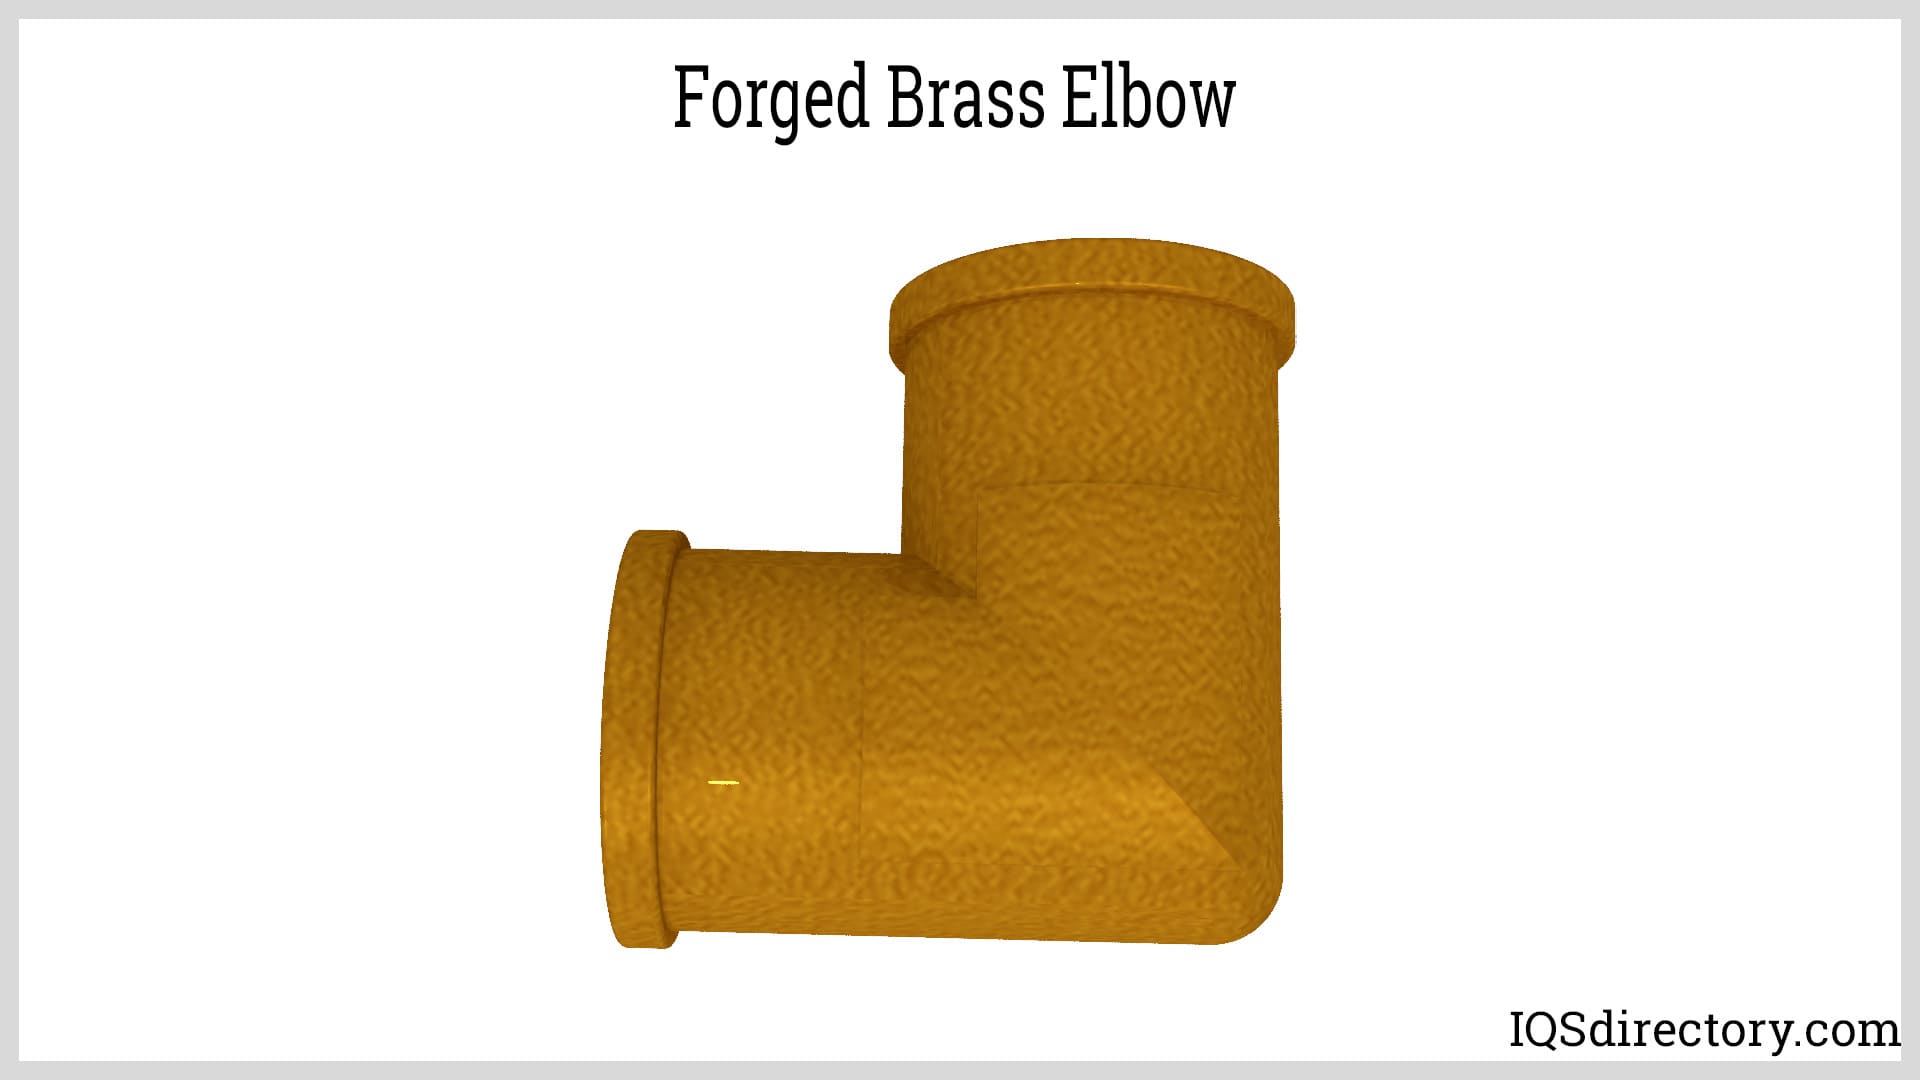 Forged Brass Elbow